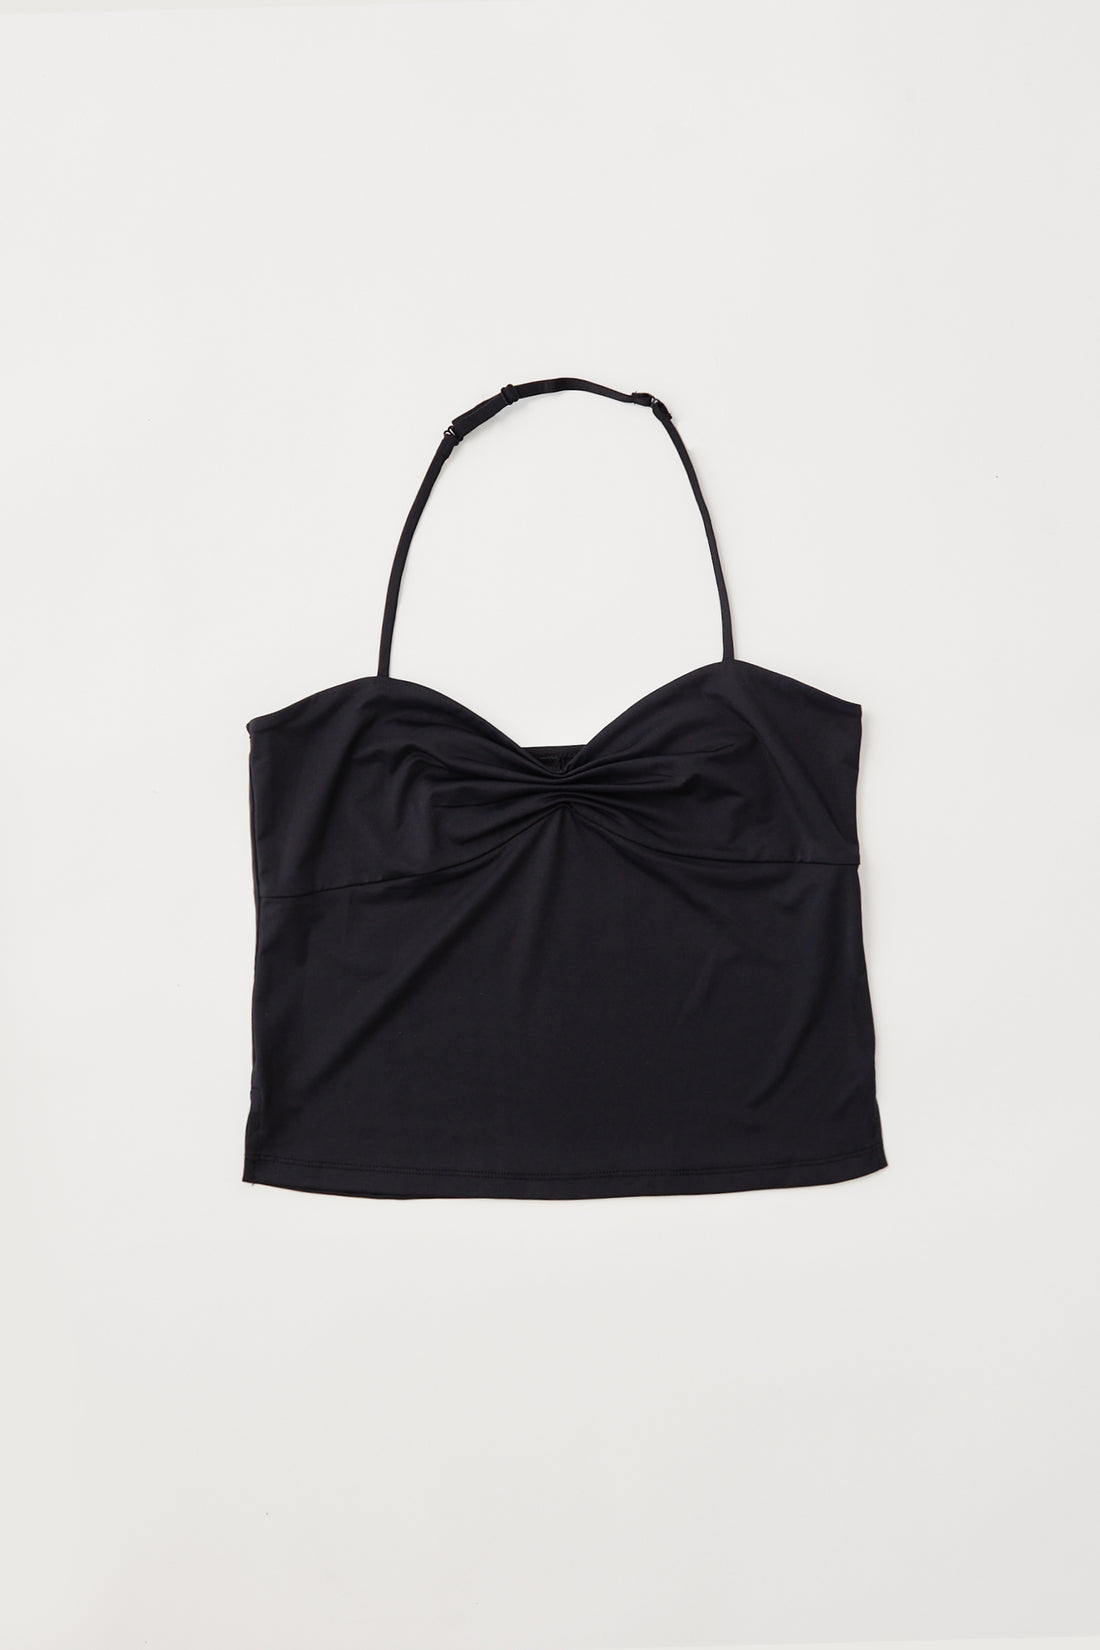 Ruched Halter Top + Black - Little Puffy